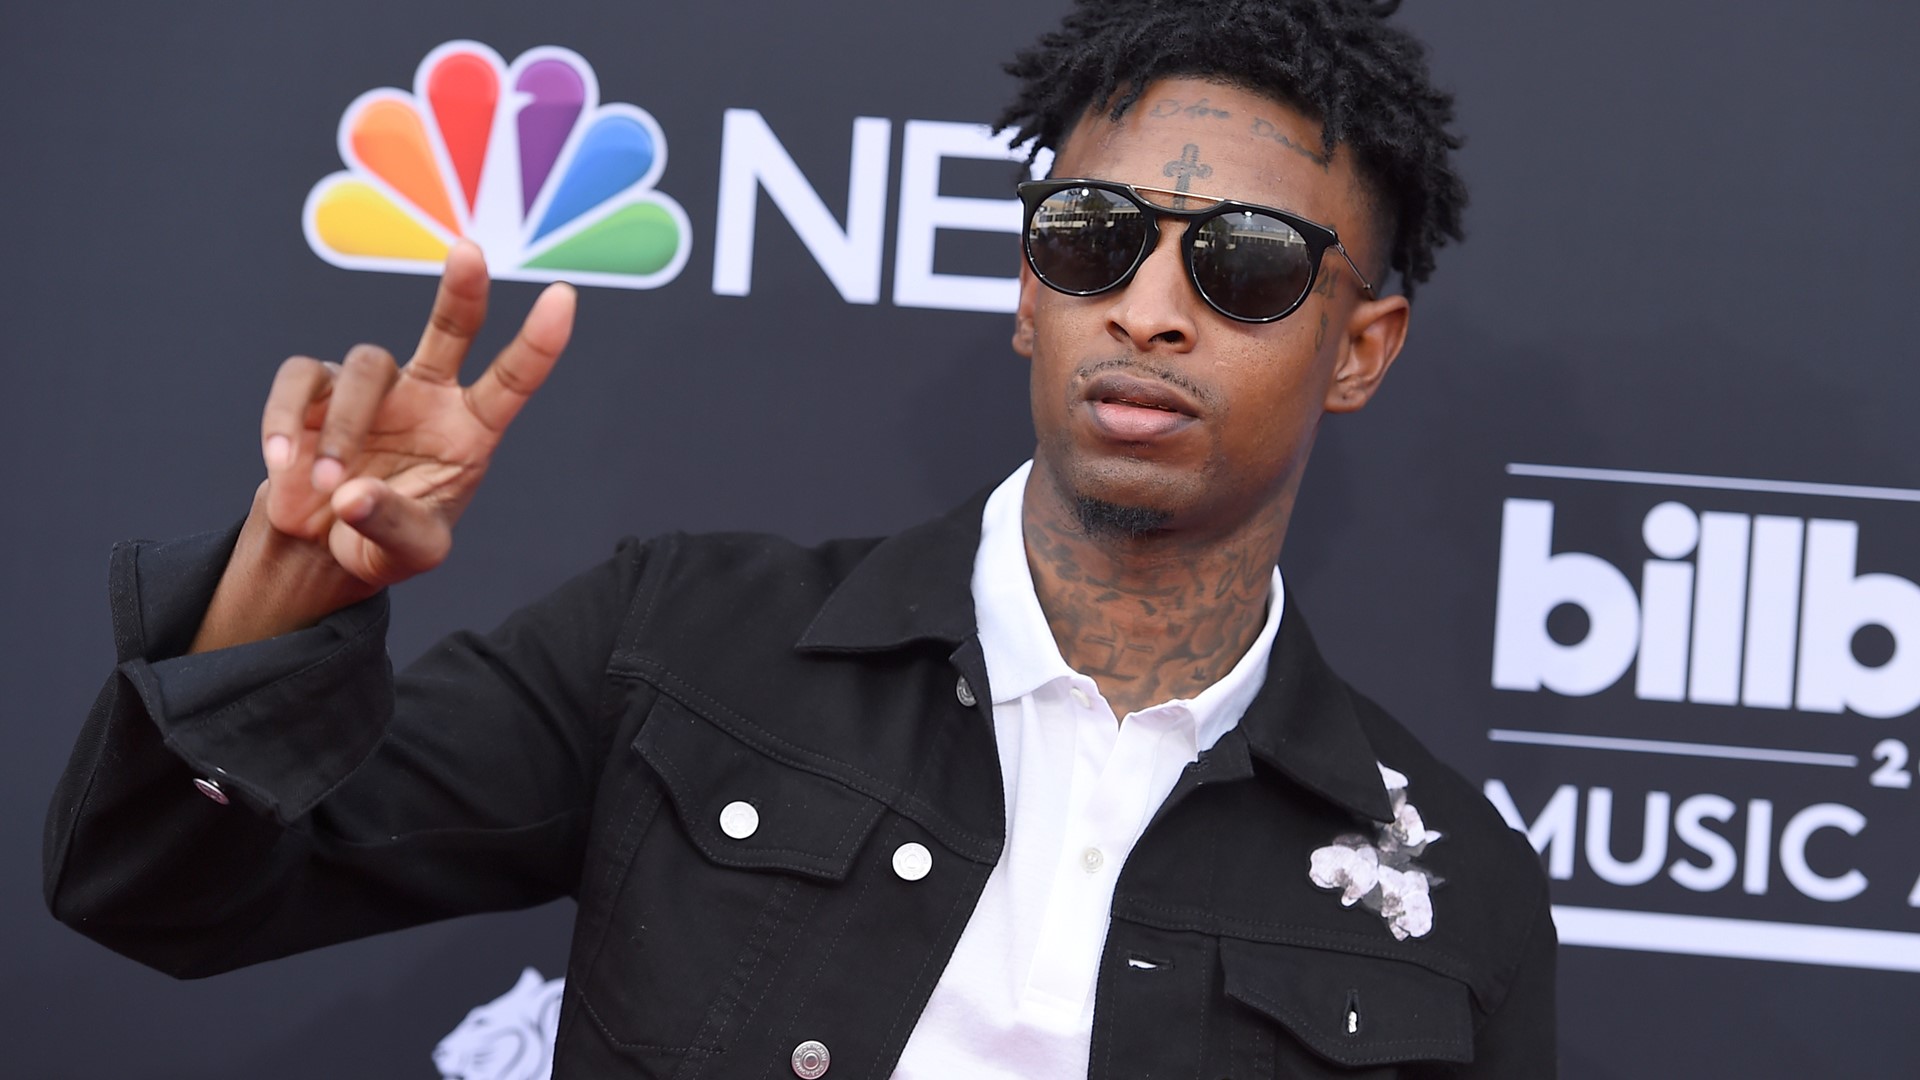 The Grammy-nominated rapper was granted an expedited hearing and has been released on bond, his lawyer stated.